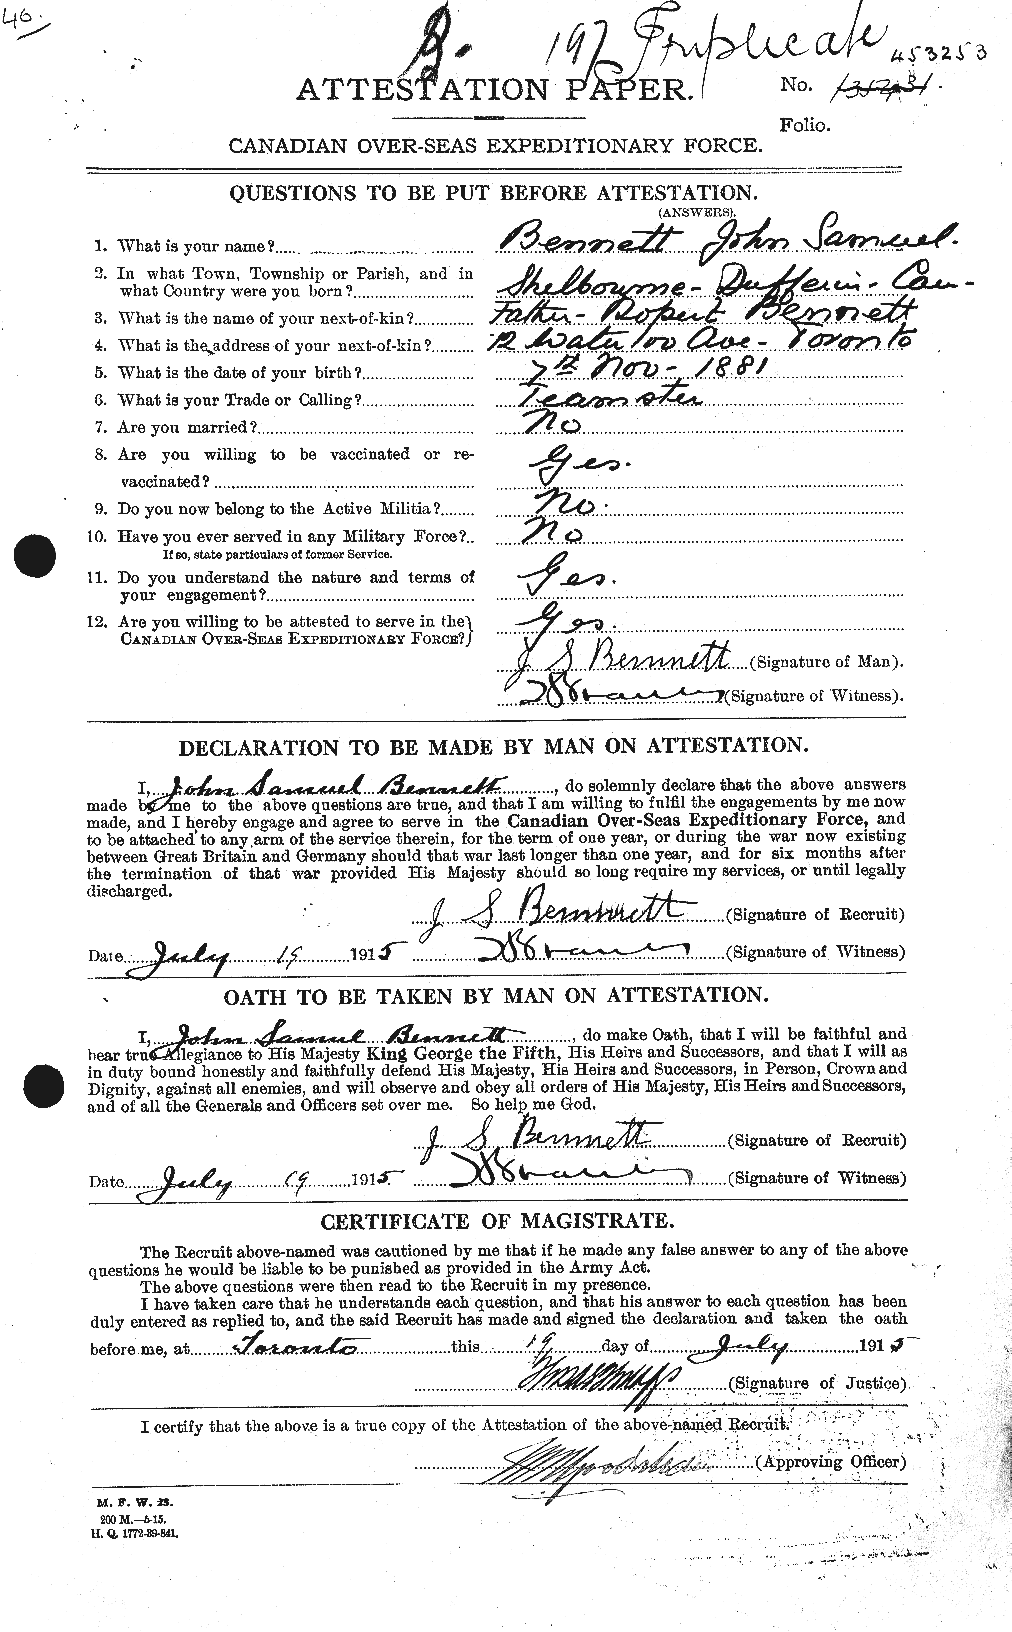 Personnel Records of the First World War - CEF 238615a